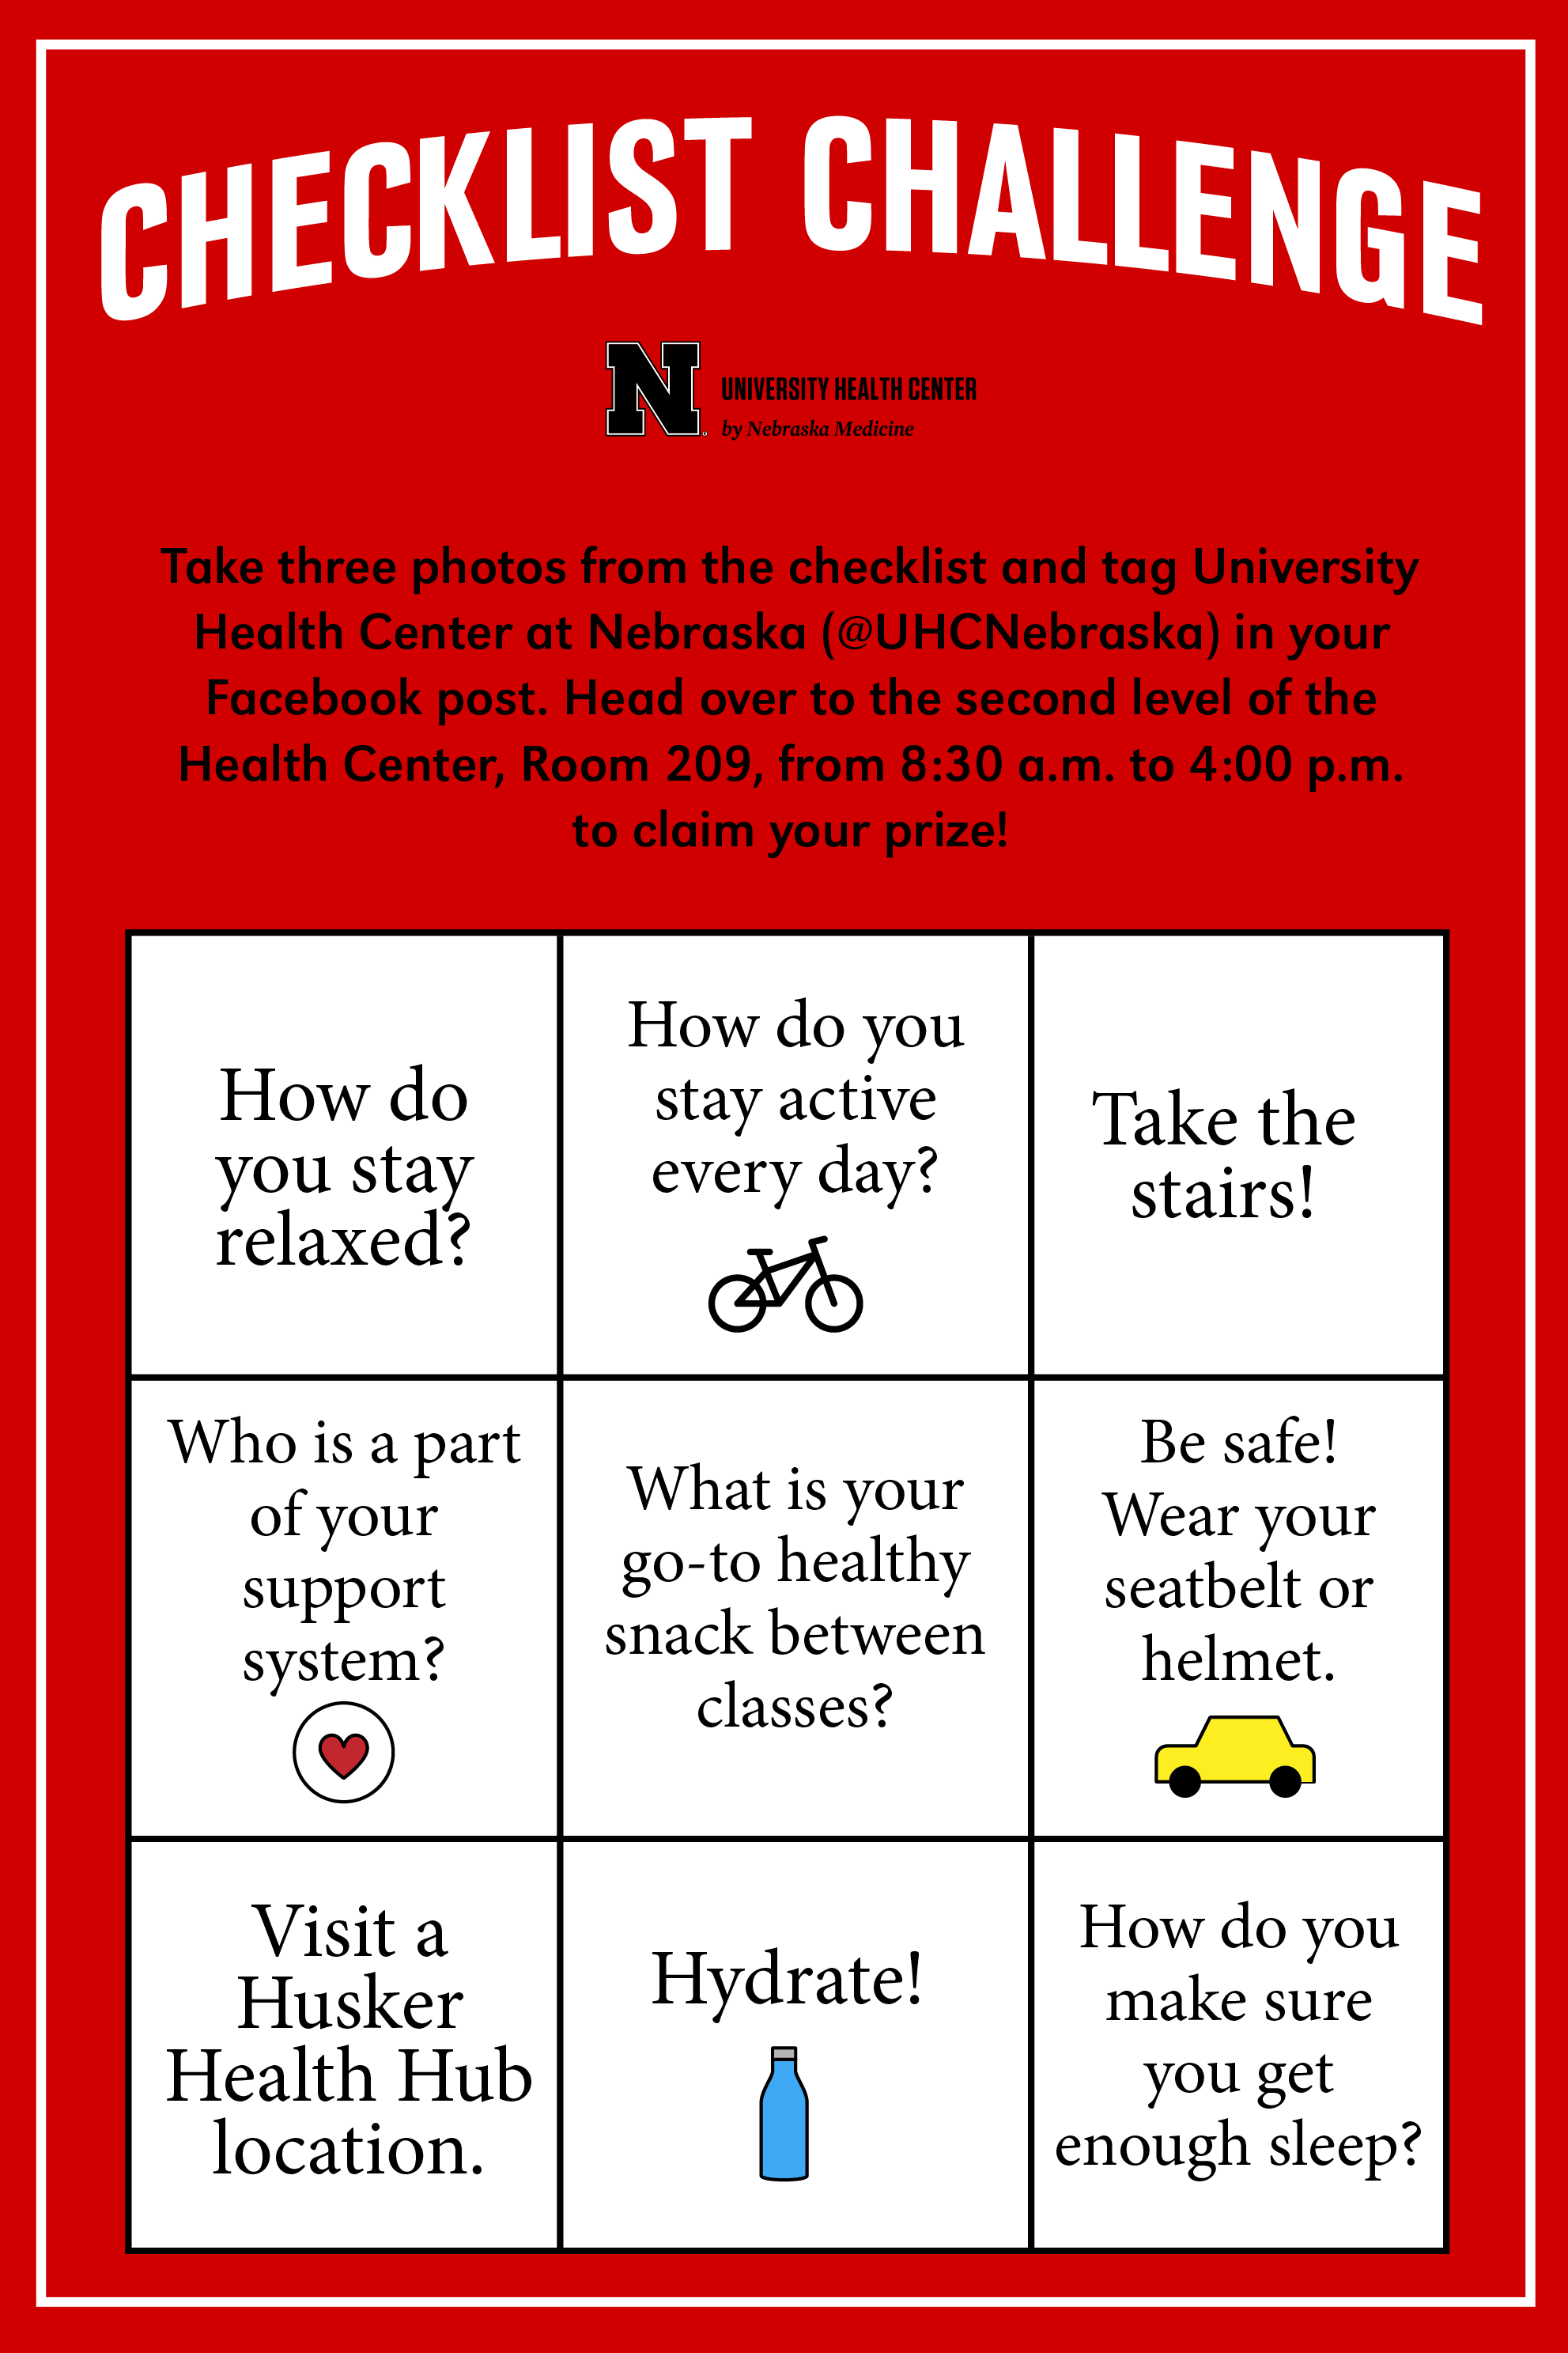 Only current University of Nebraska-Lincoln students are eligible to win.